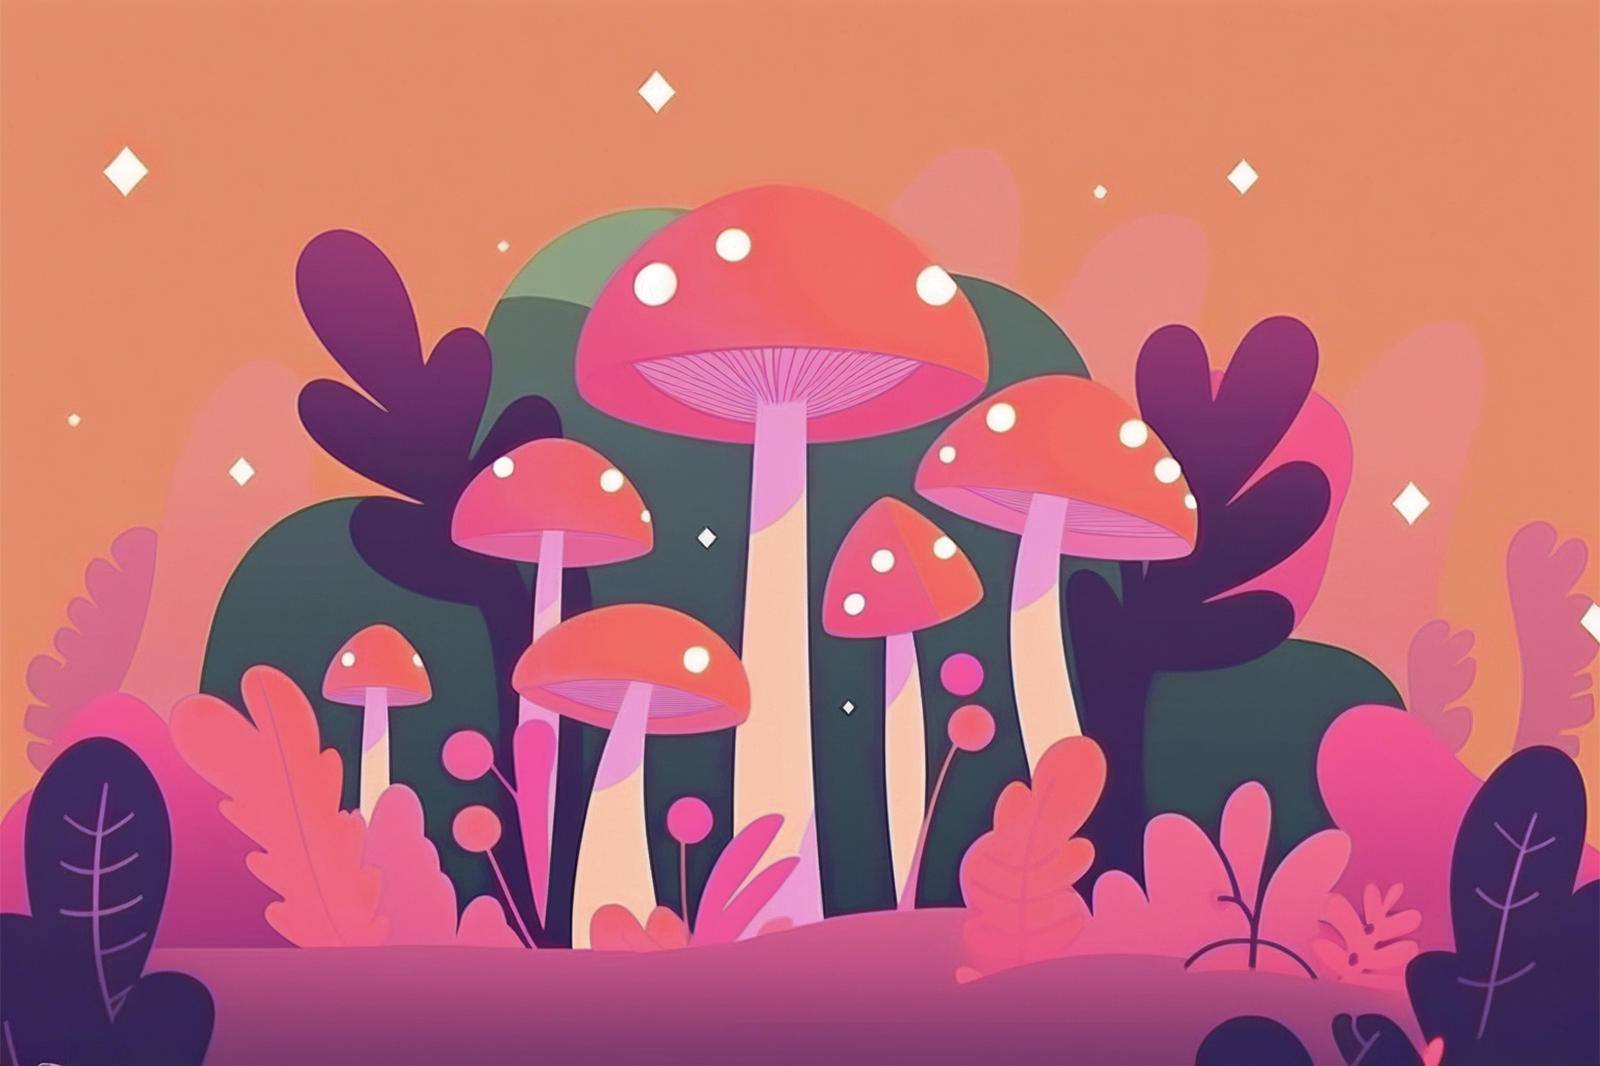 Vibrant mushrooms and trees in a fantastical forest with a towering green tree in the background, set against an orange sky